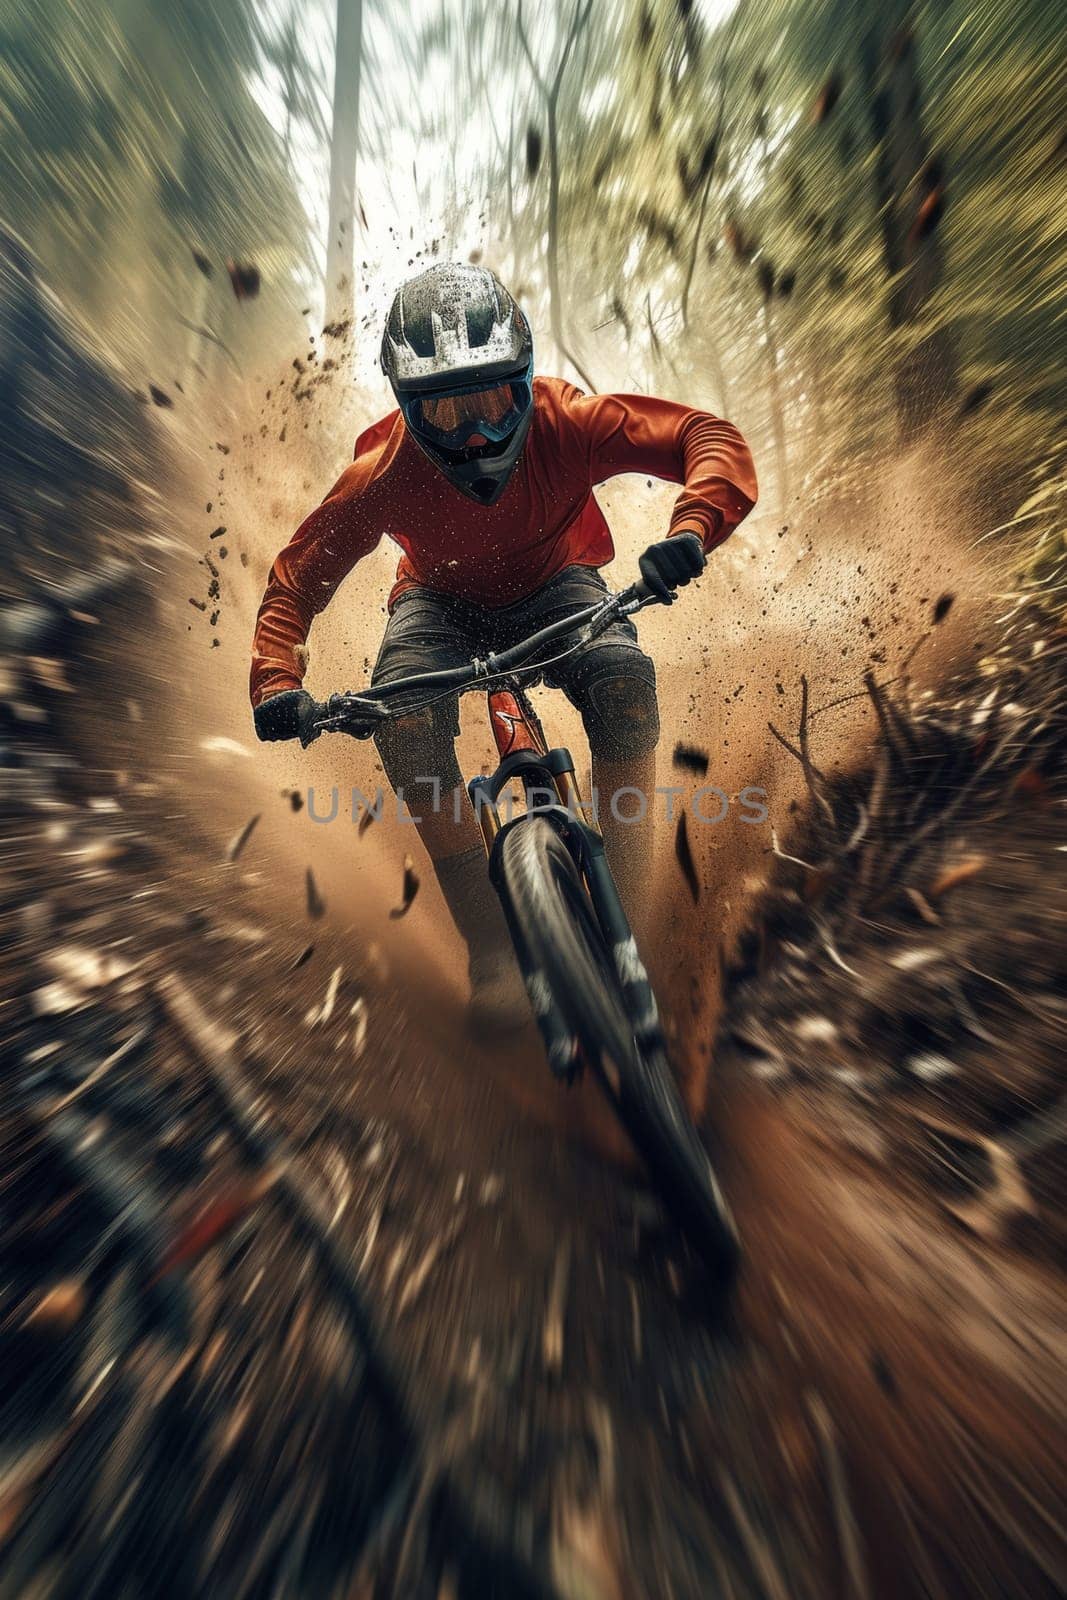 Mountain biker in action, speeding down a dirt trail in a sun-dappled forest, showcasing dynamic motion and sport